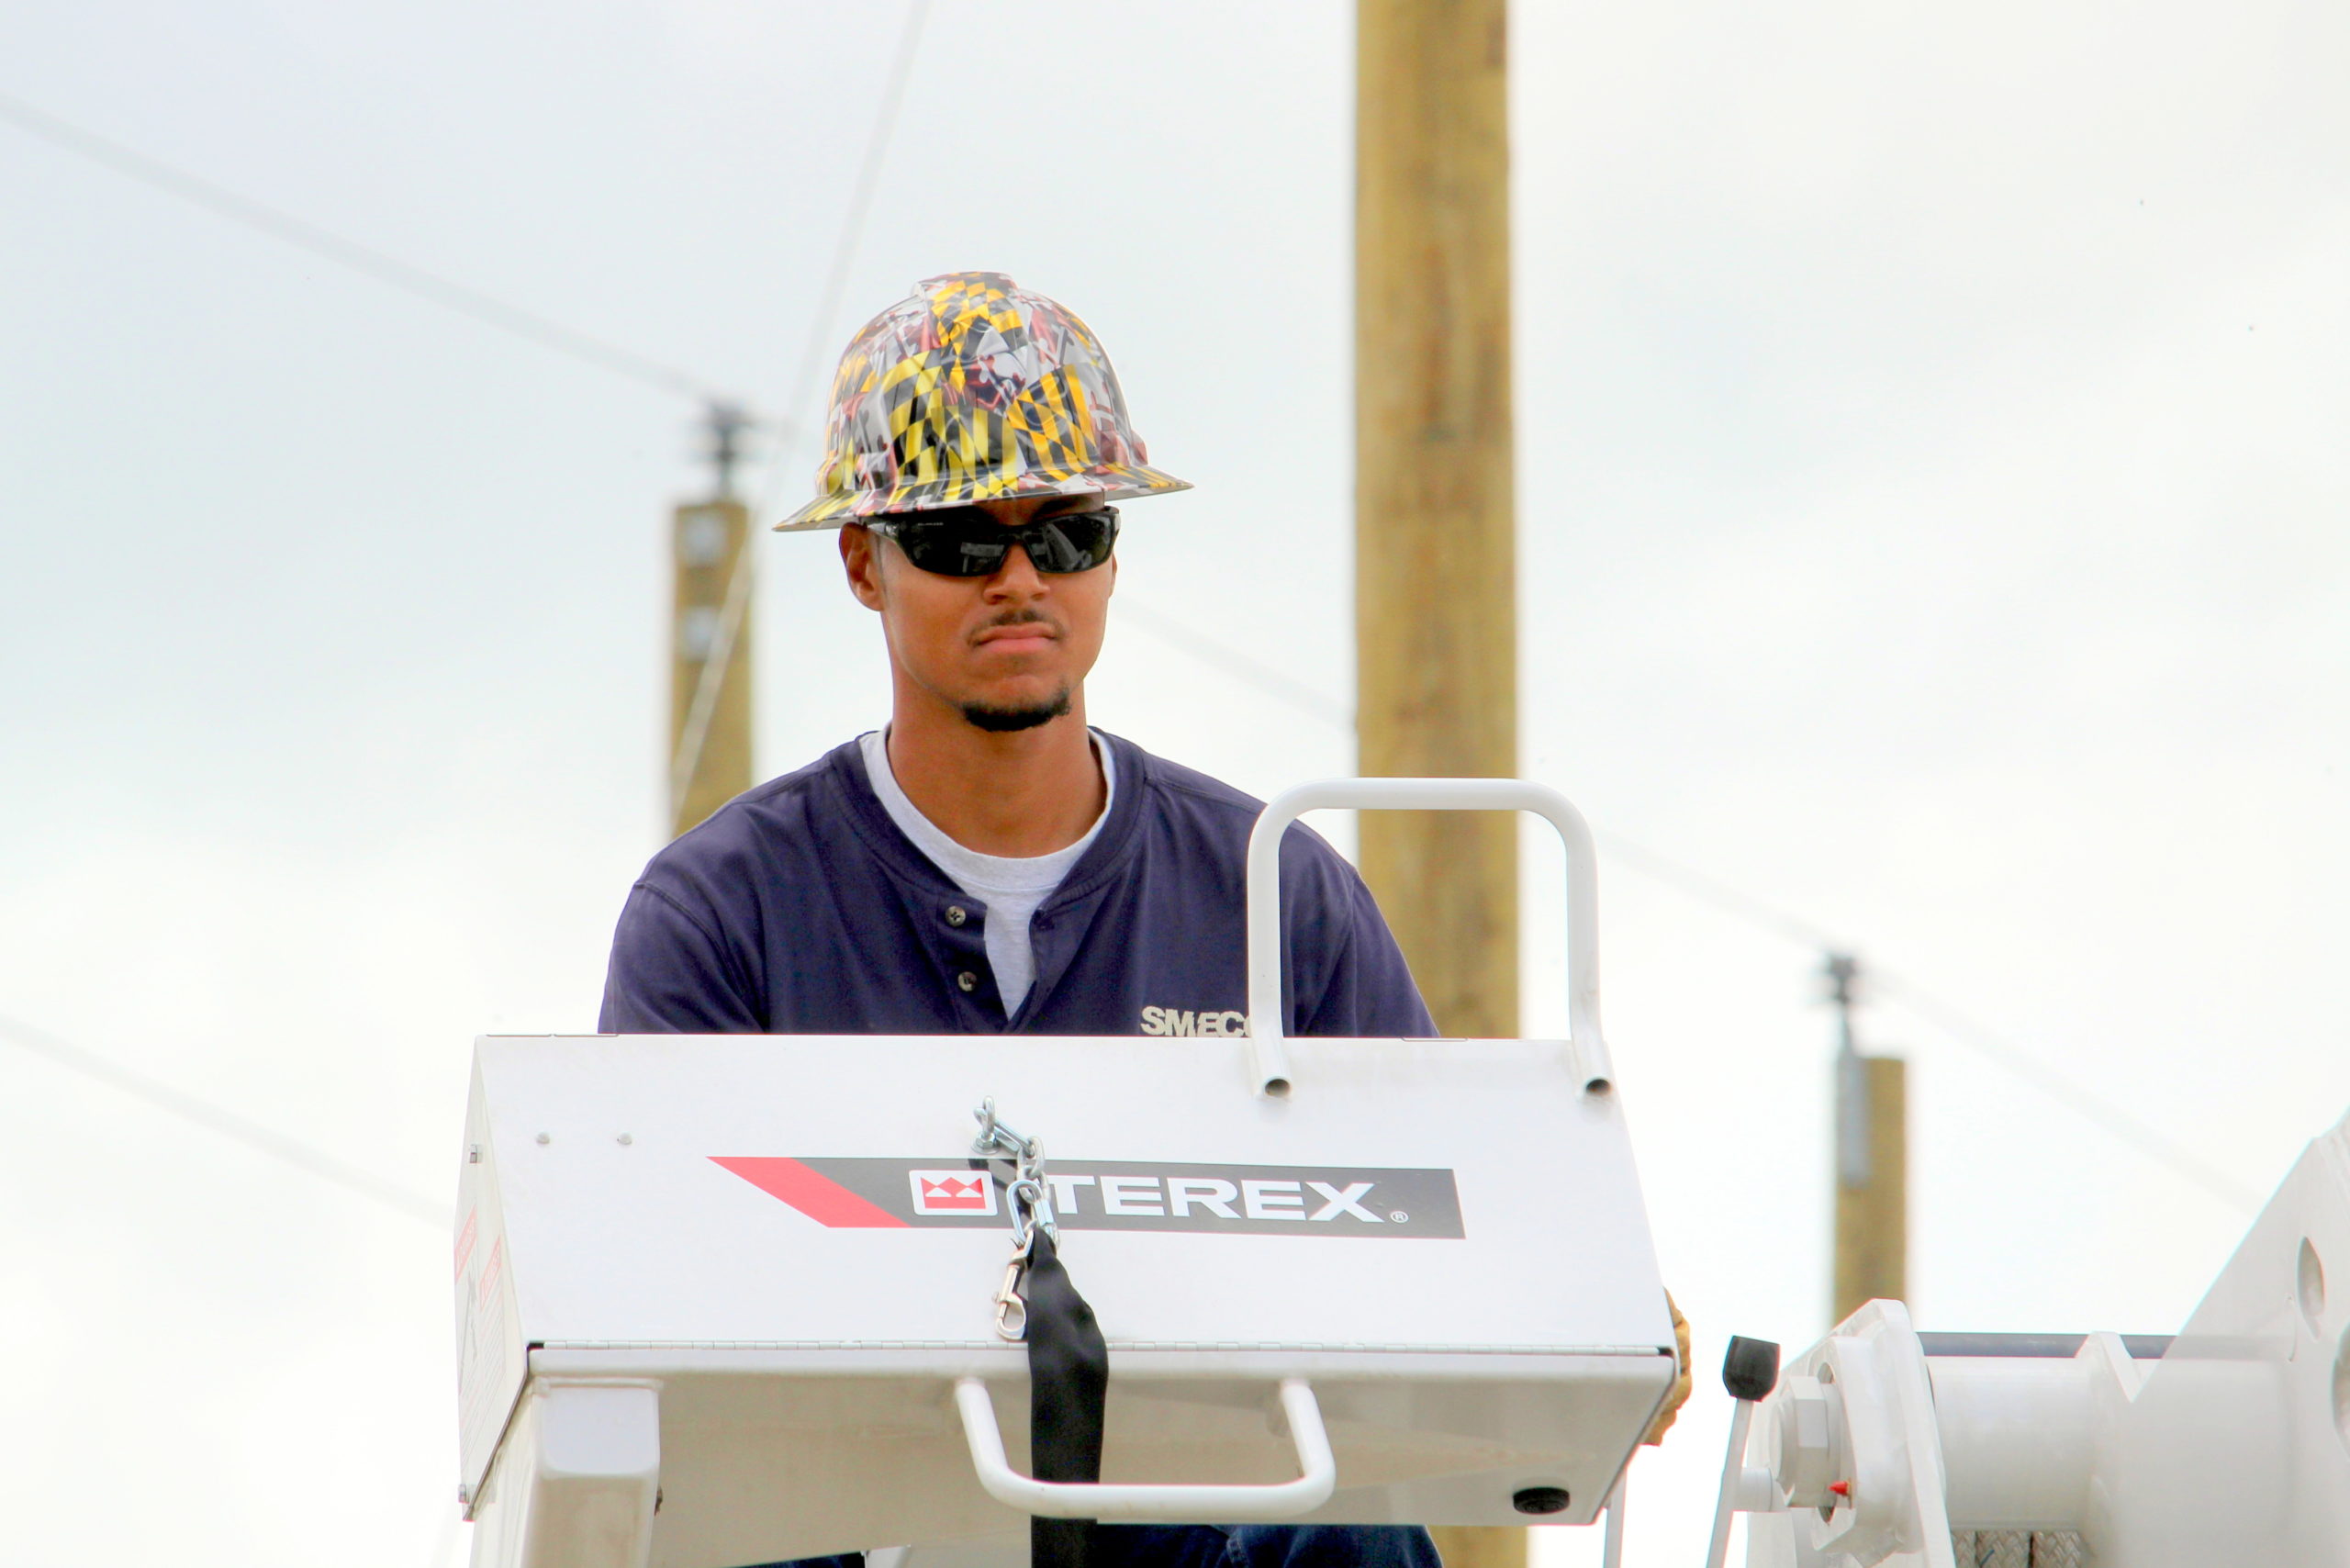 SMECO lineworker competes in the Equipment Operator’s Rodeo competition at the 2022 Gaff-n-Go Lineworker’s Rodeo.